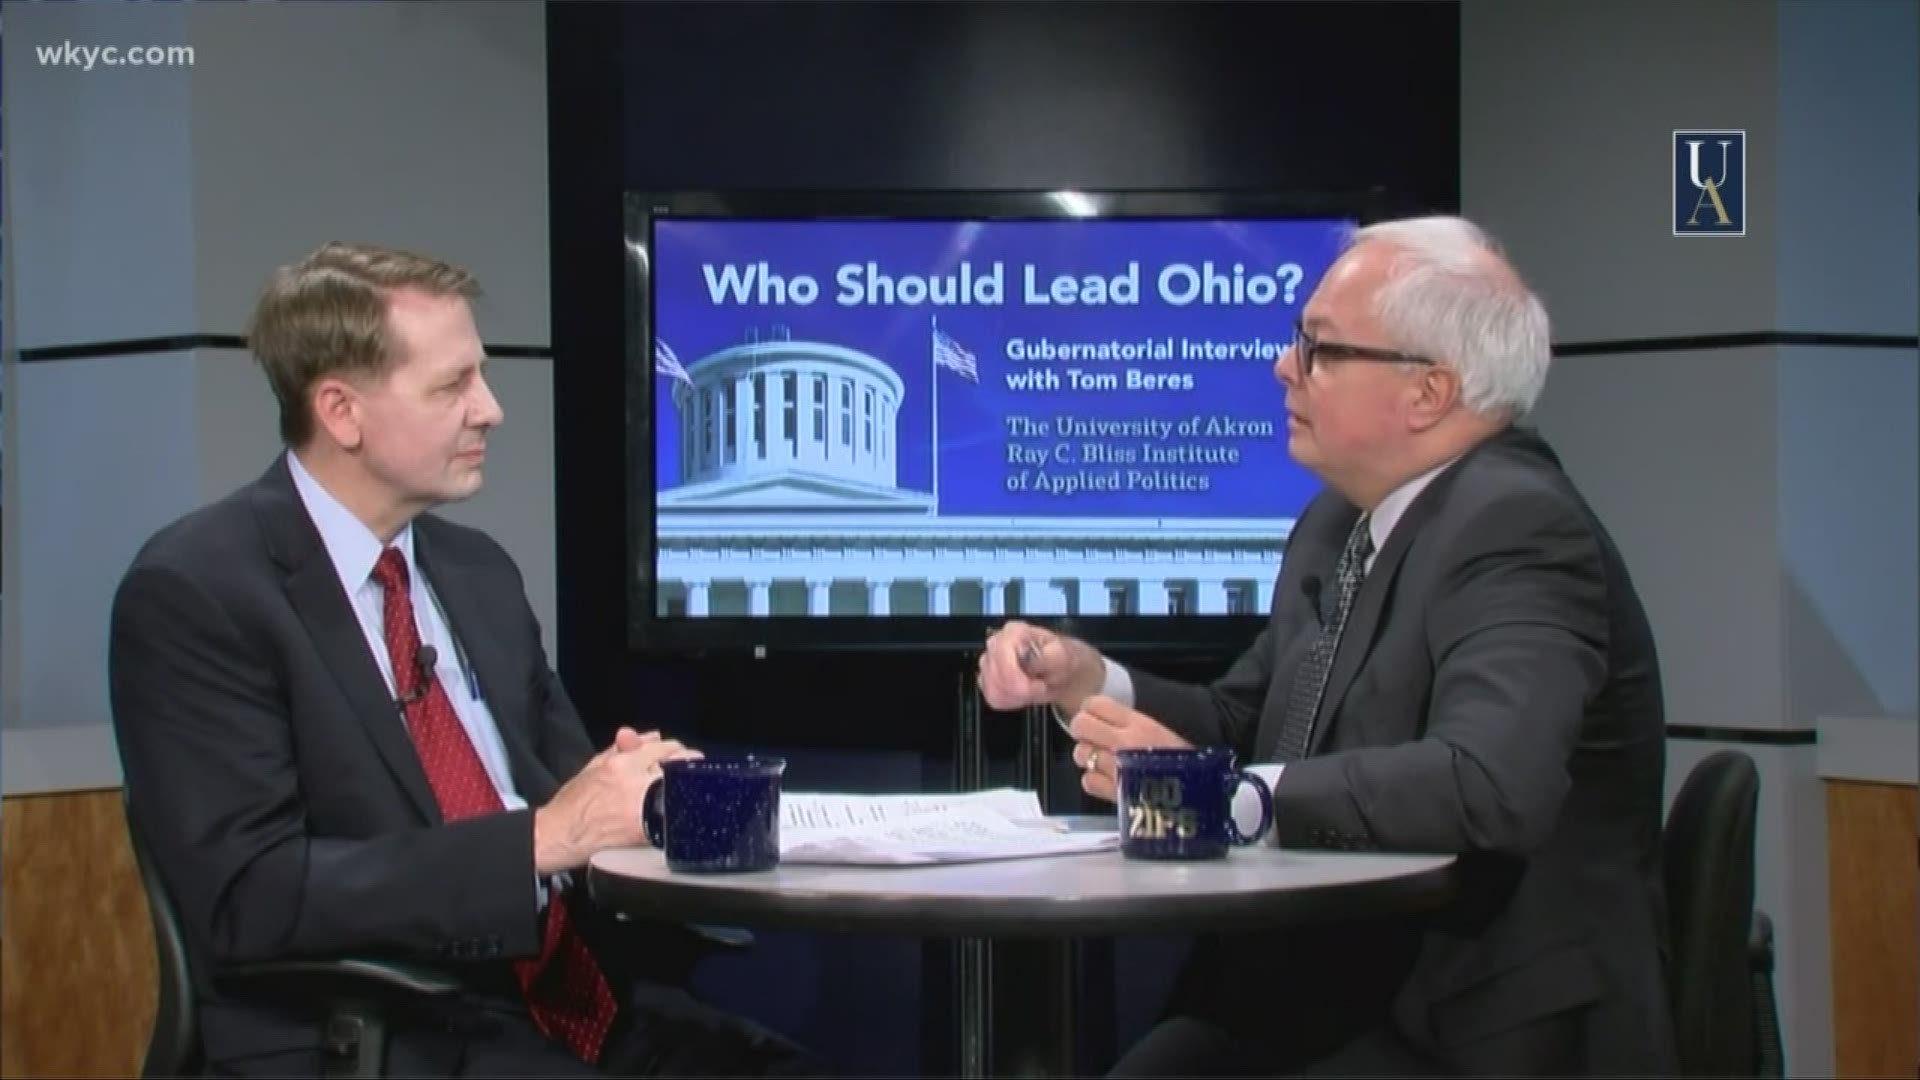 Ohio gubernatorial candidate Richard Cordray sits down with Tom Beres